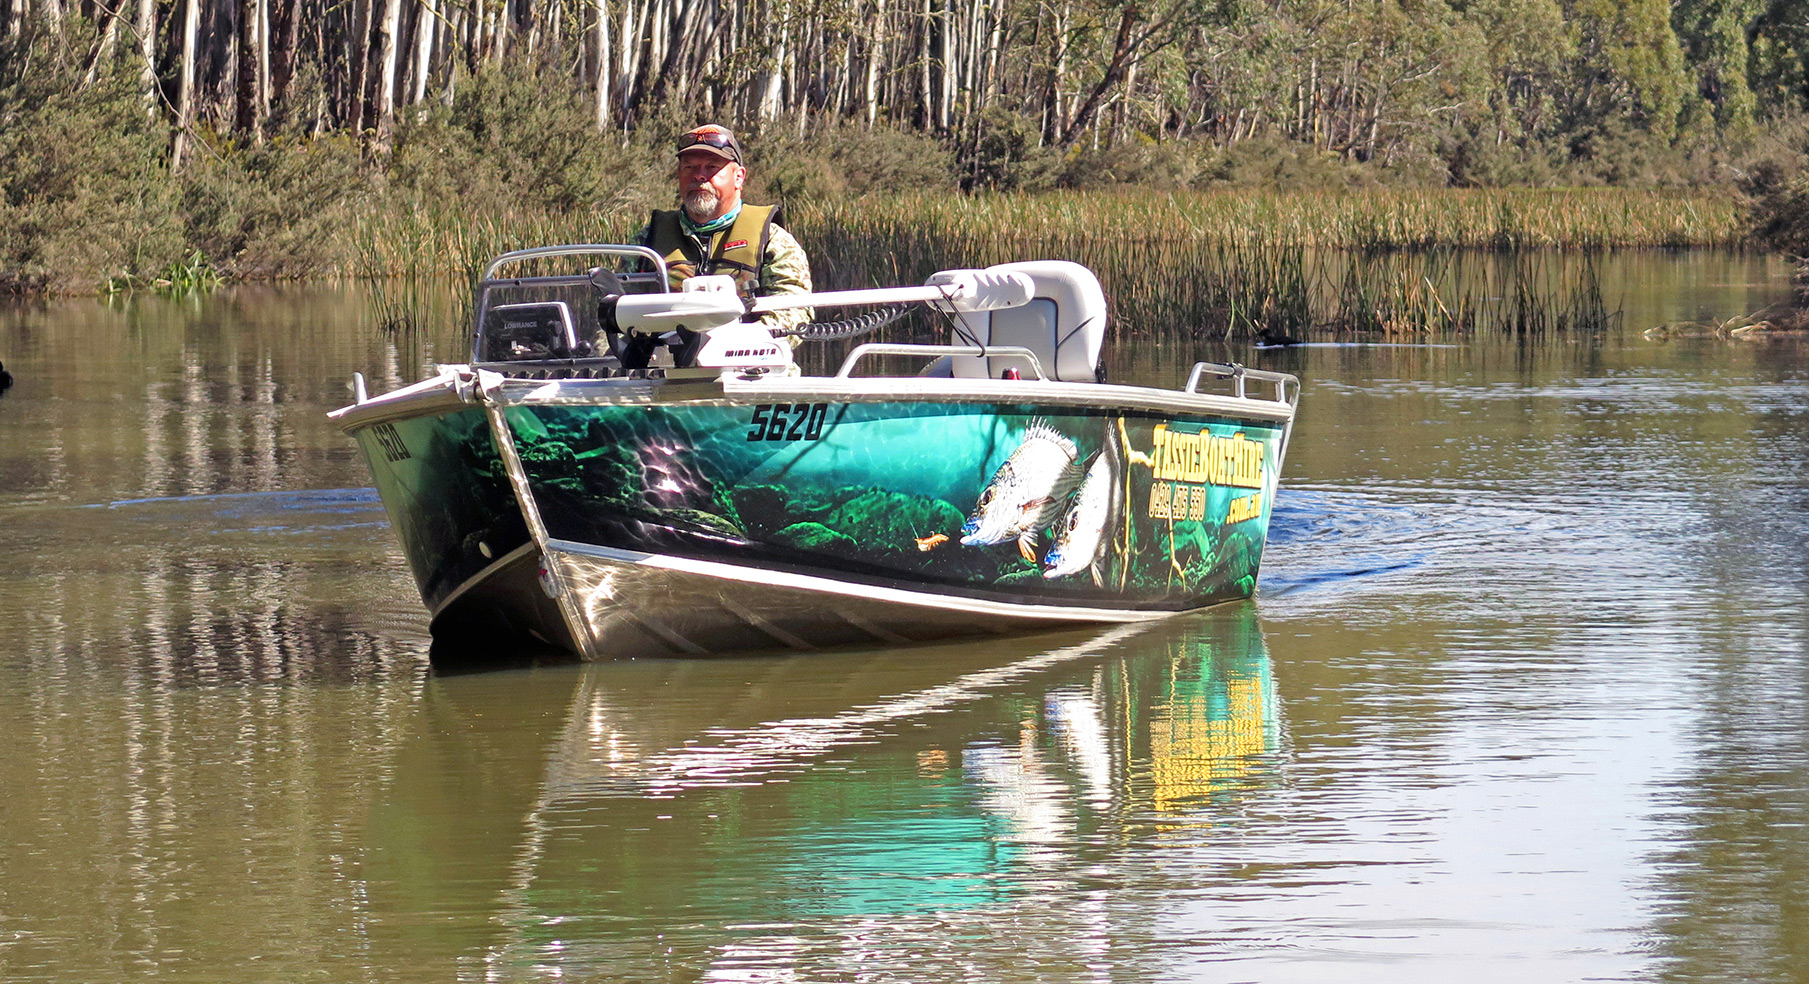 While Penstock offers reasonable fishing for wading anglers, a boat such as this hired craft from Tassie Boat Hire will really increase your chances of success.